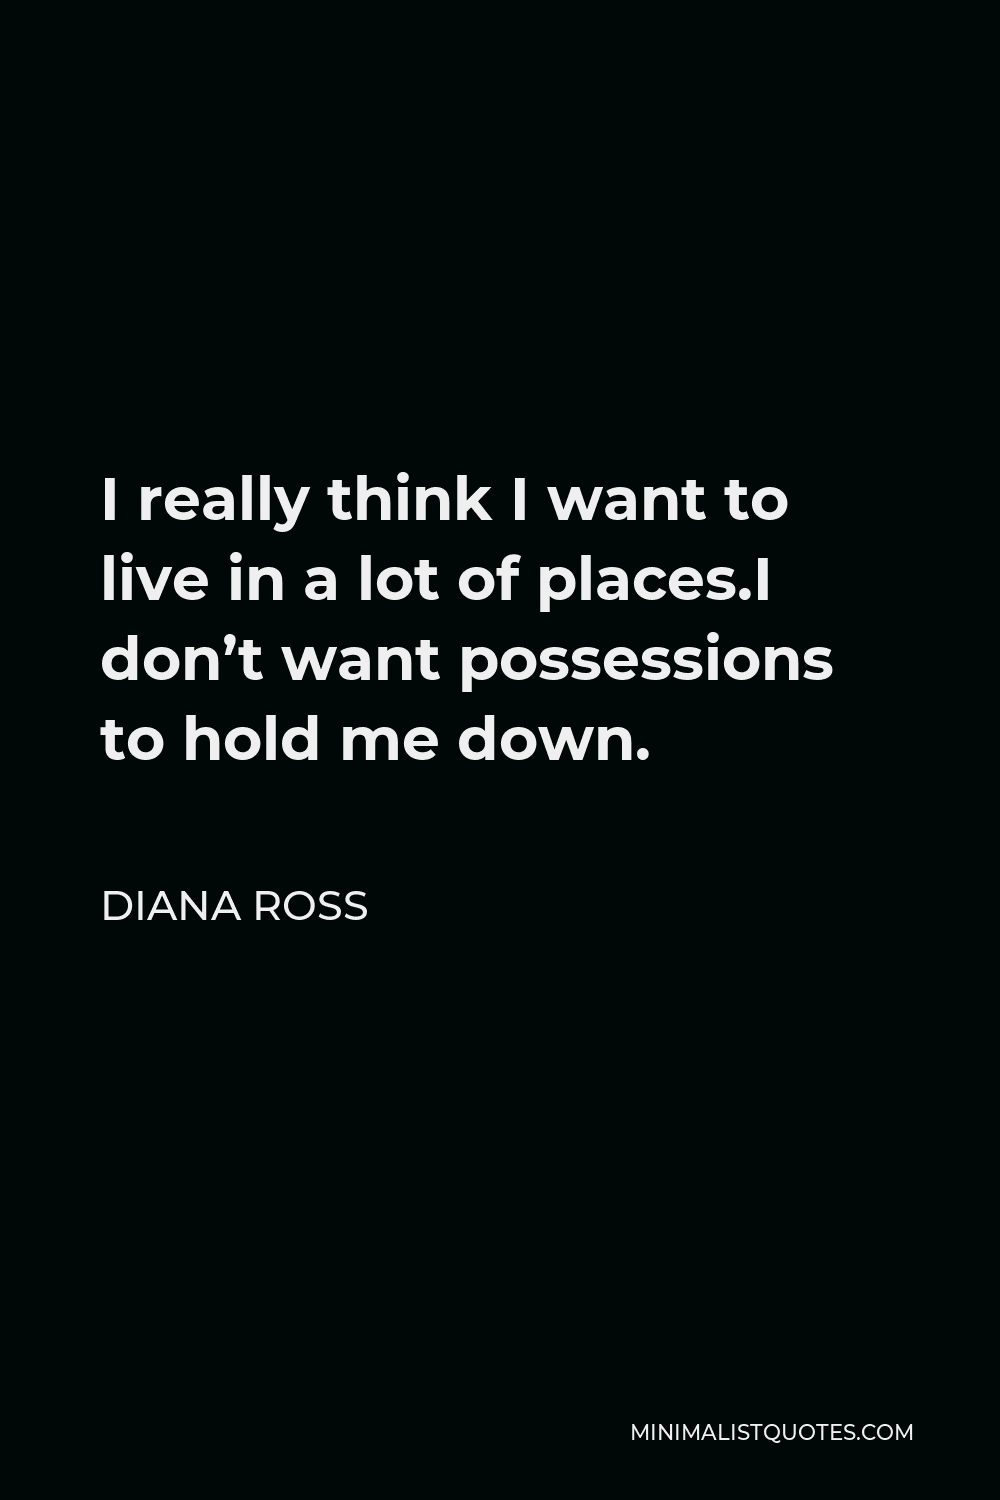 Diana Ross Quote - I really think I want to live in a lot of places.I don’t want possessions to hold me down.